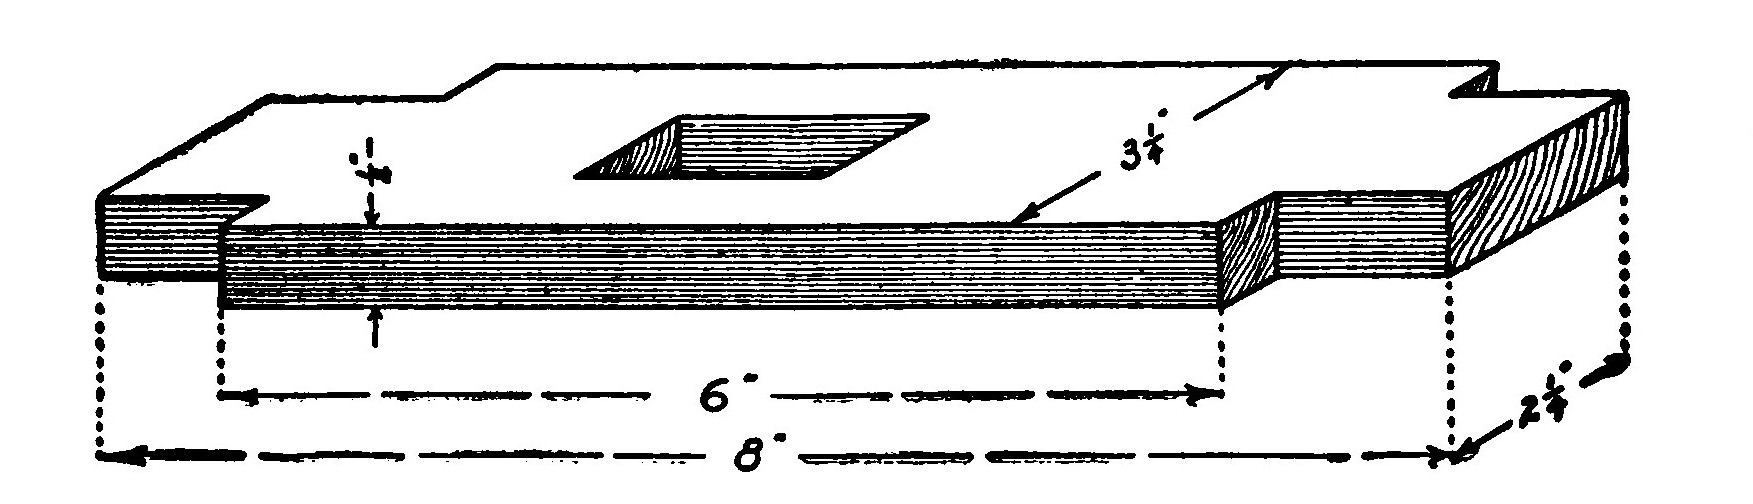 Fig. 264.—Details of the Floor of the Car.